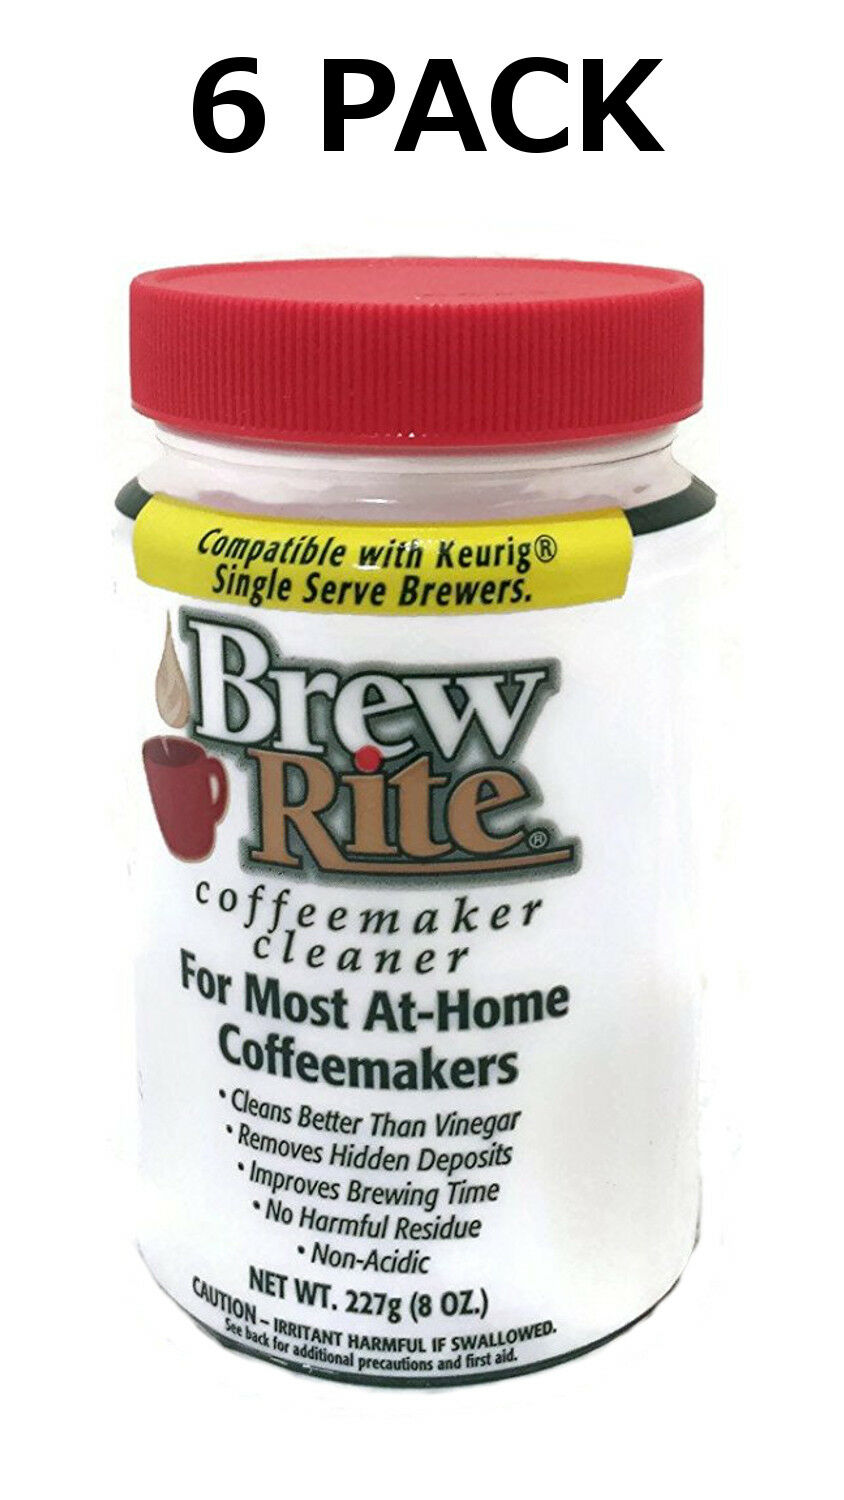 (6) Brew Rite Coffee Maker Cleaner For Espresso Machines And Drip Coffeemakers